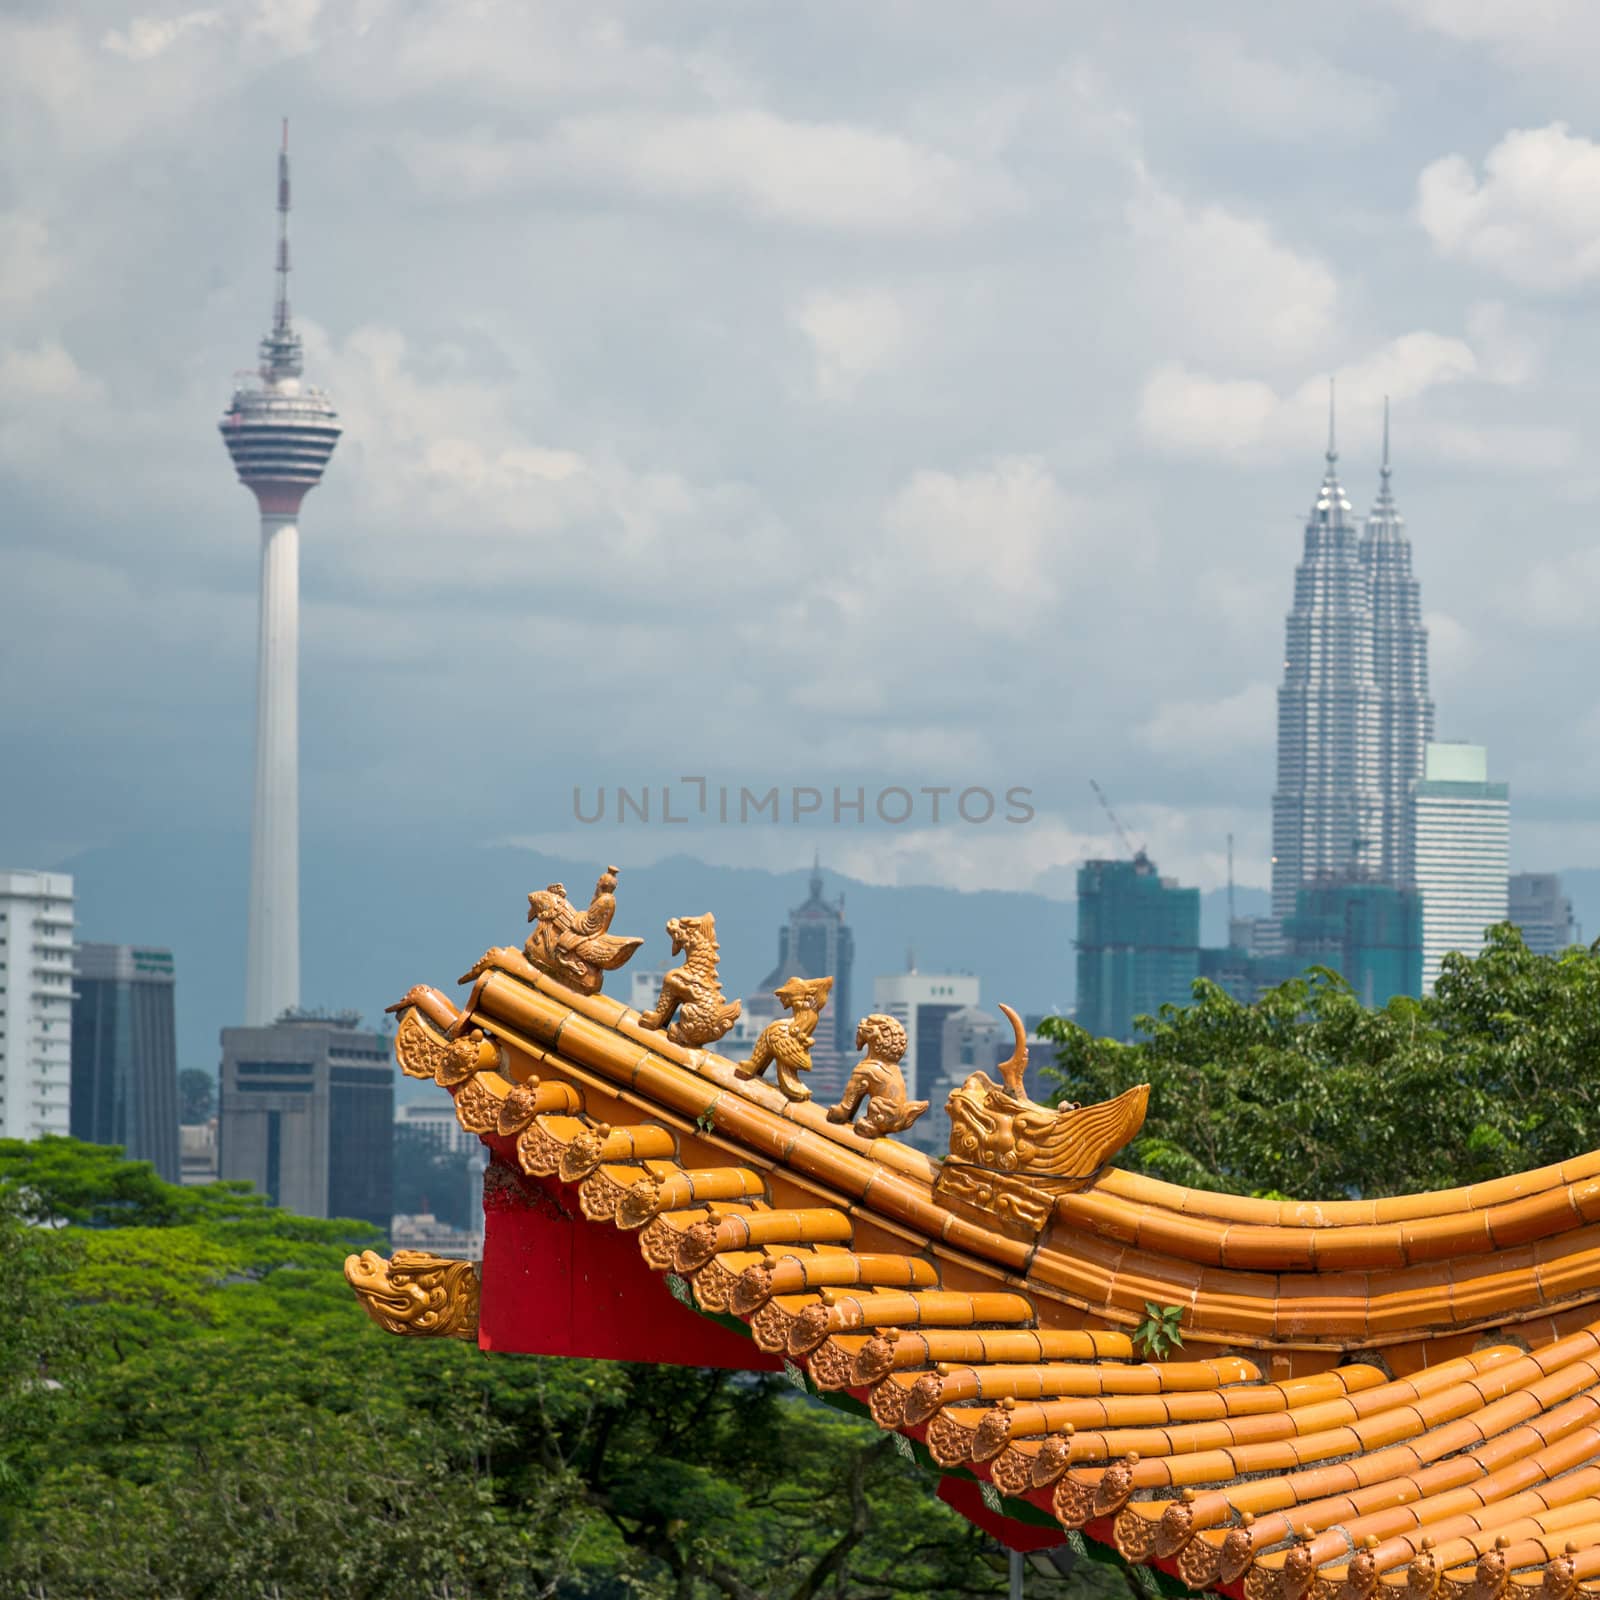 Mixture of architectural styles in Kuala Lumpur, Malaysia.  The roof of ancient chinese temple on the background of two symbols of Kuala Lumpur - KL Tower and Petronas Twin Towers.